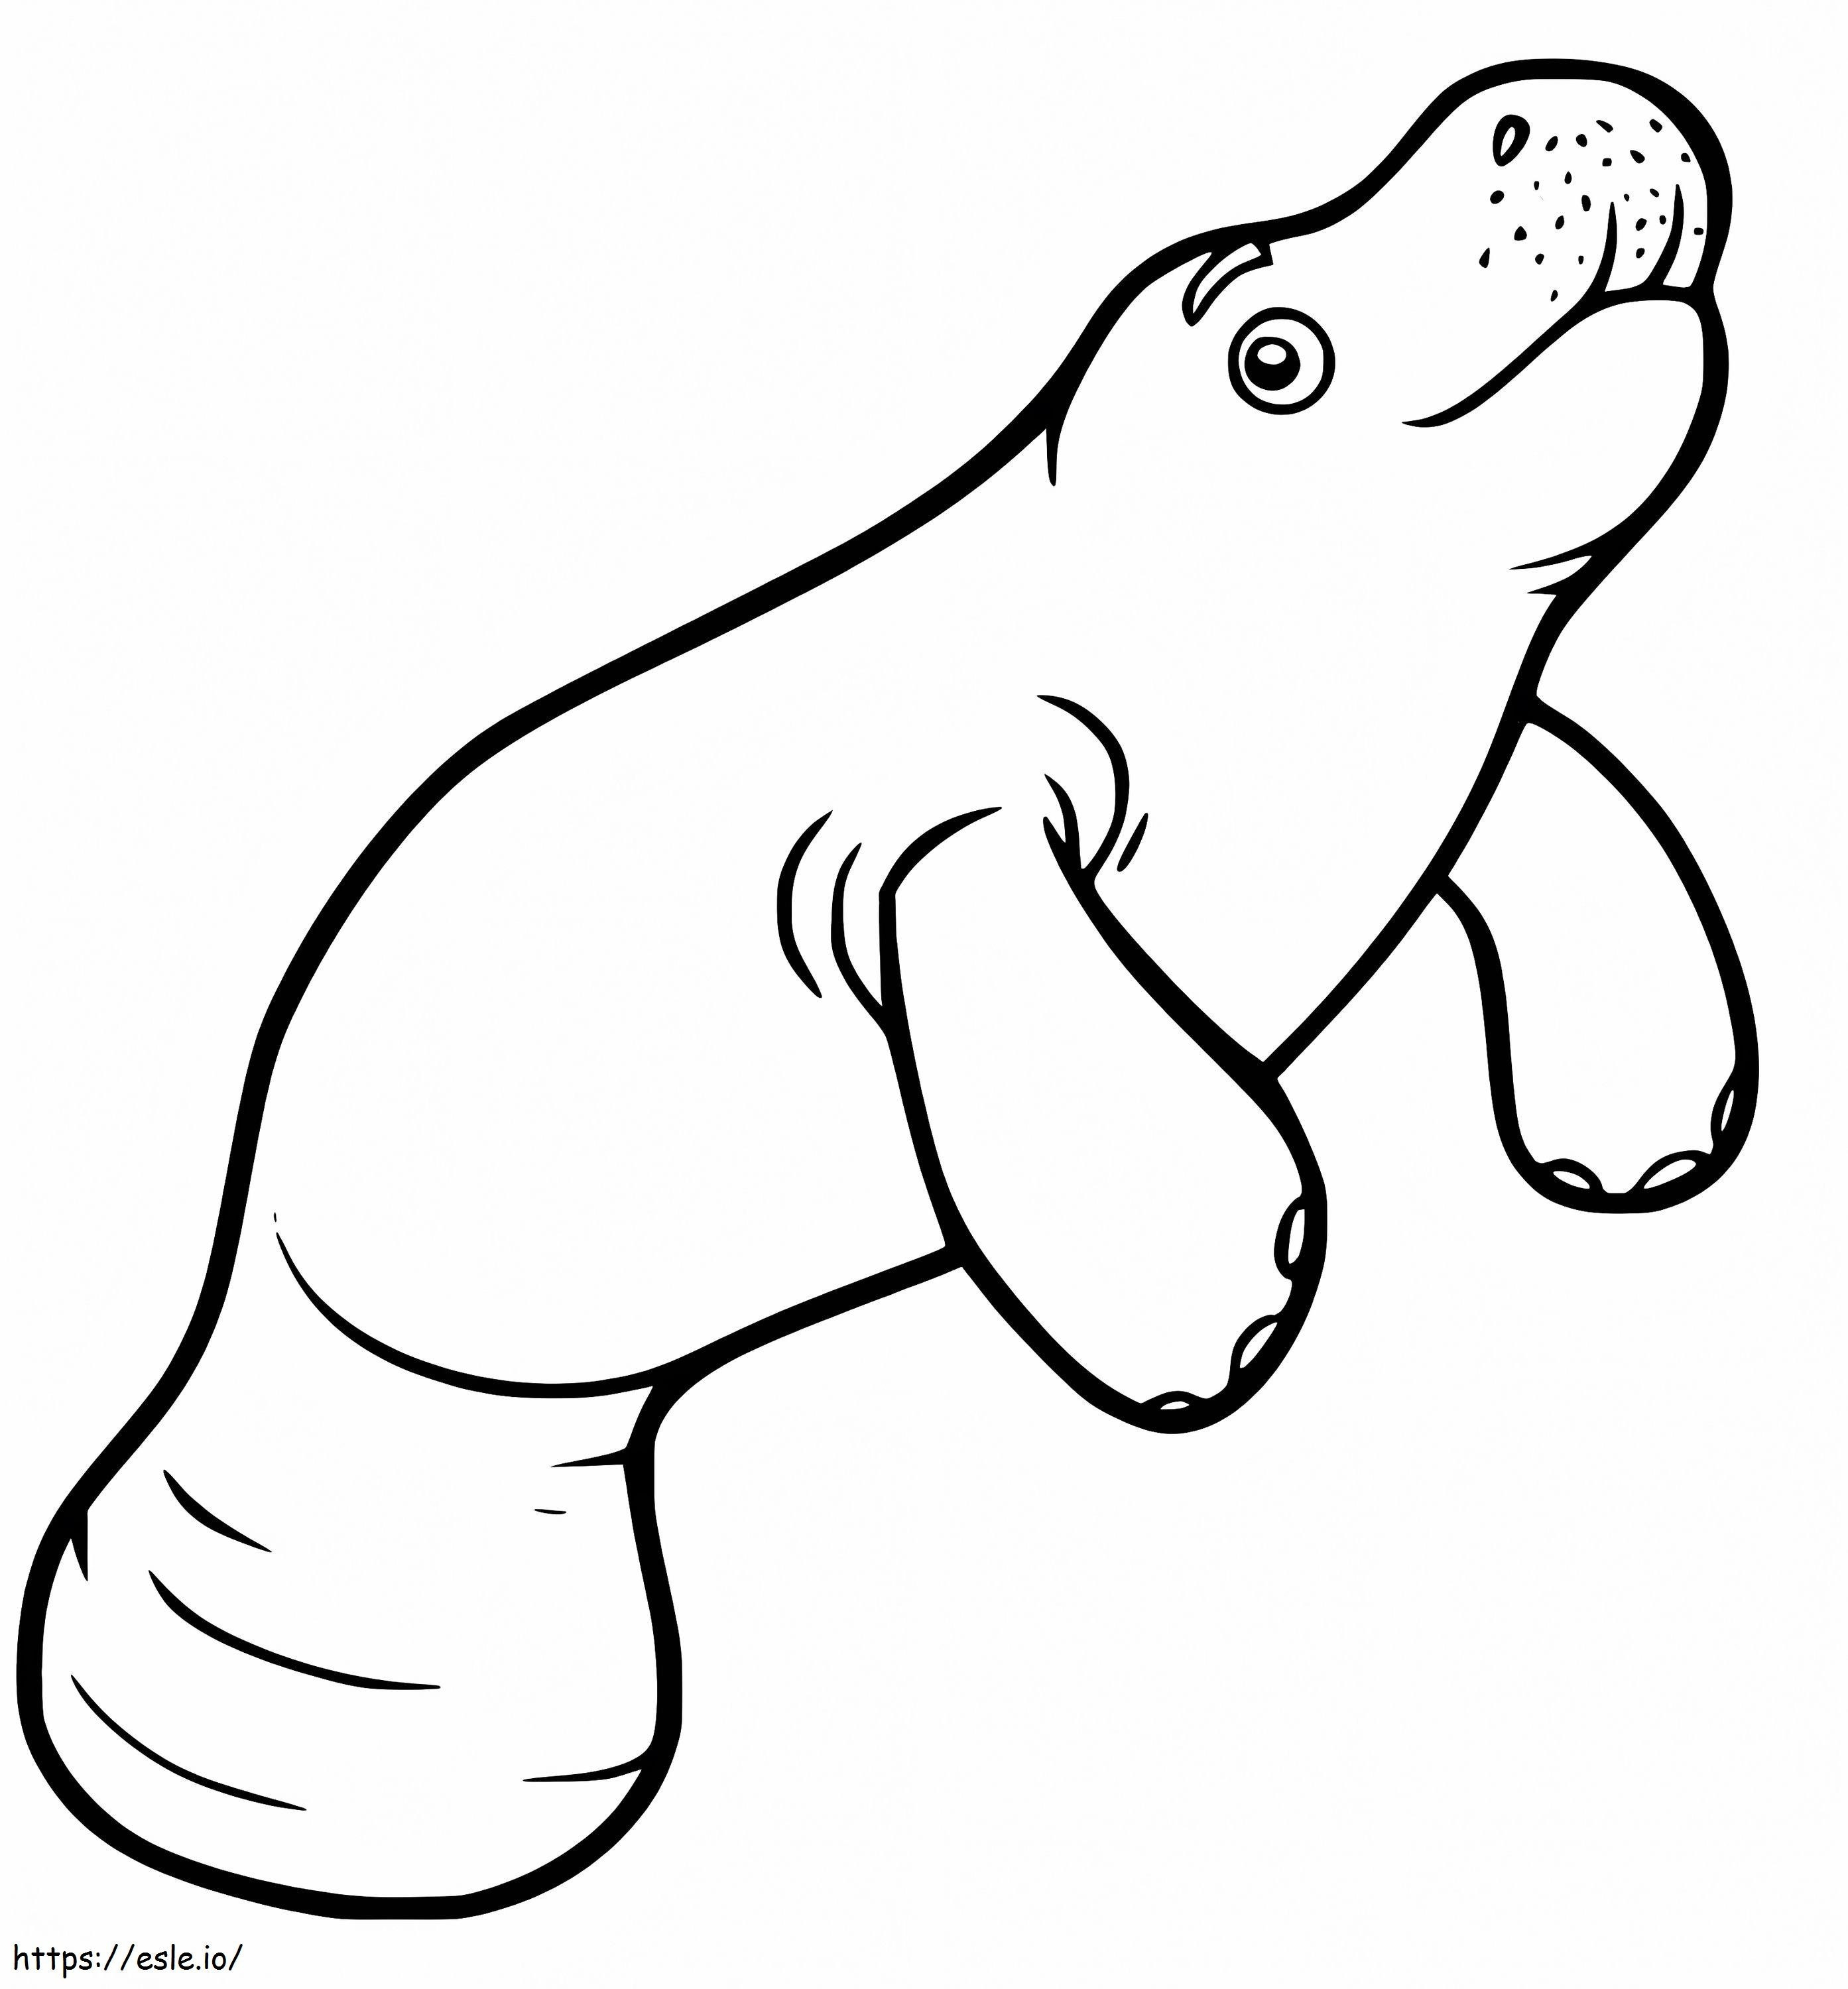 Happy Manatee coloring page